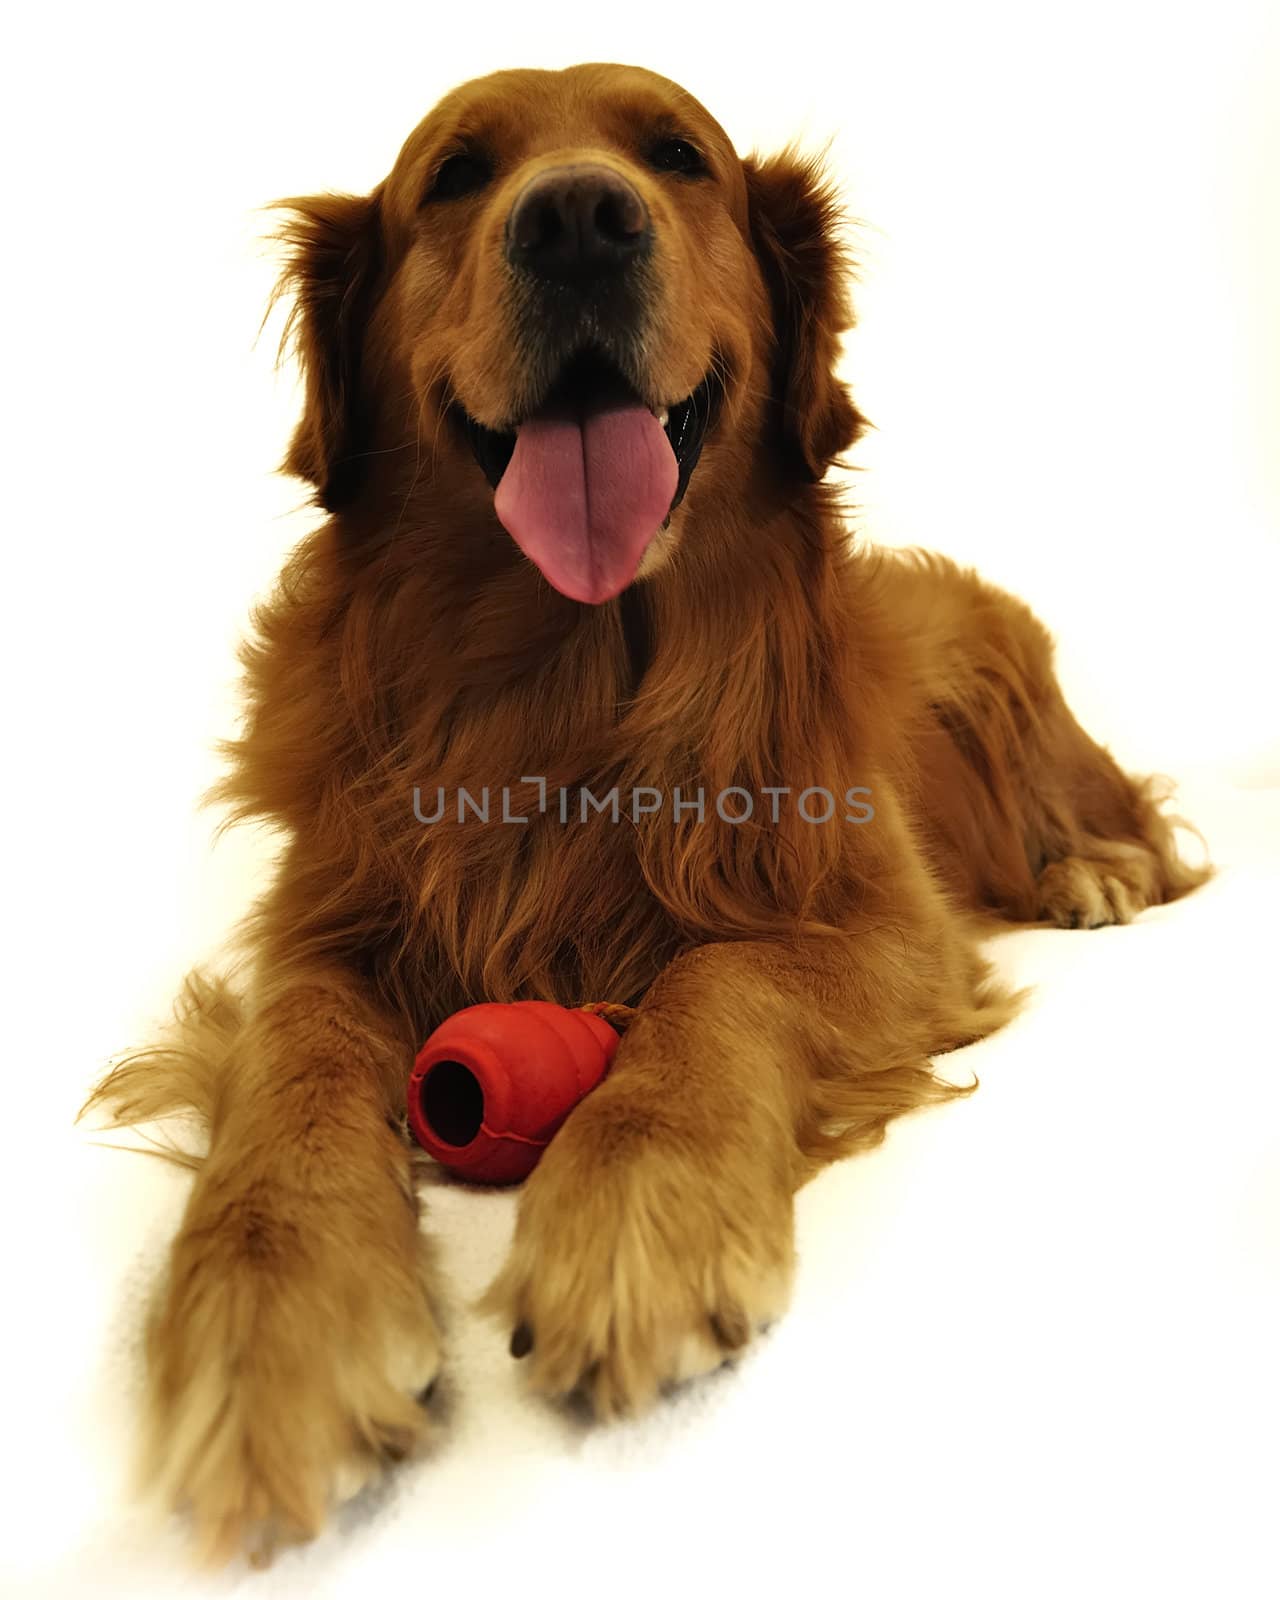 Golden retriever dog very expressive face. Lying with red toy, front view.